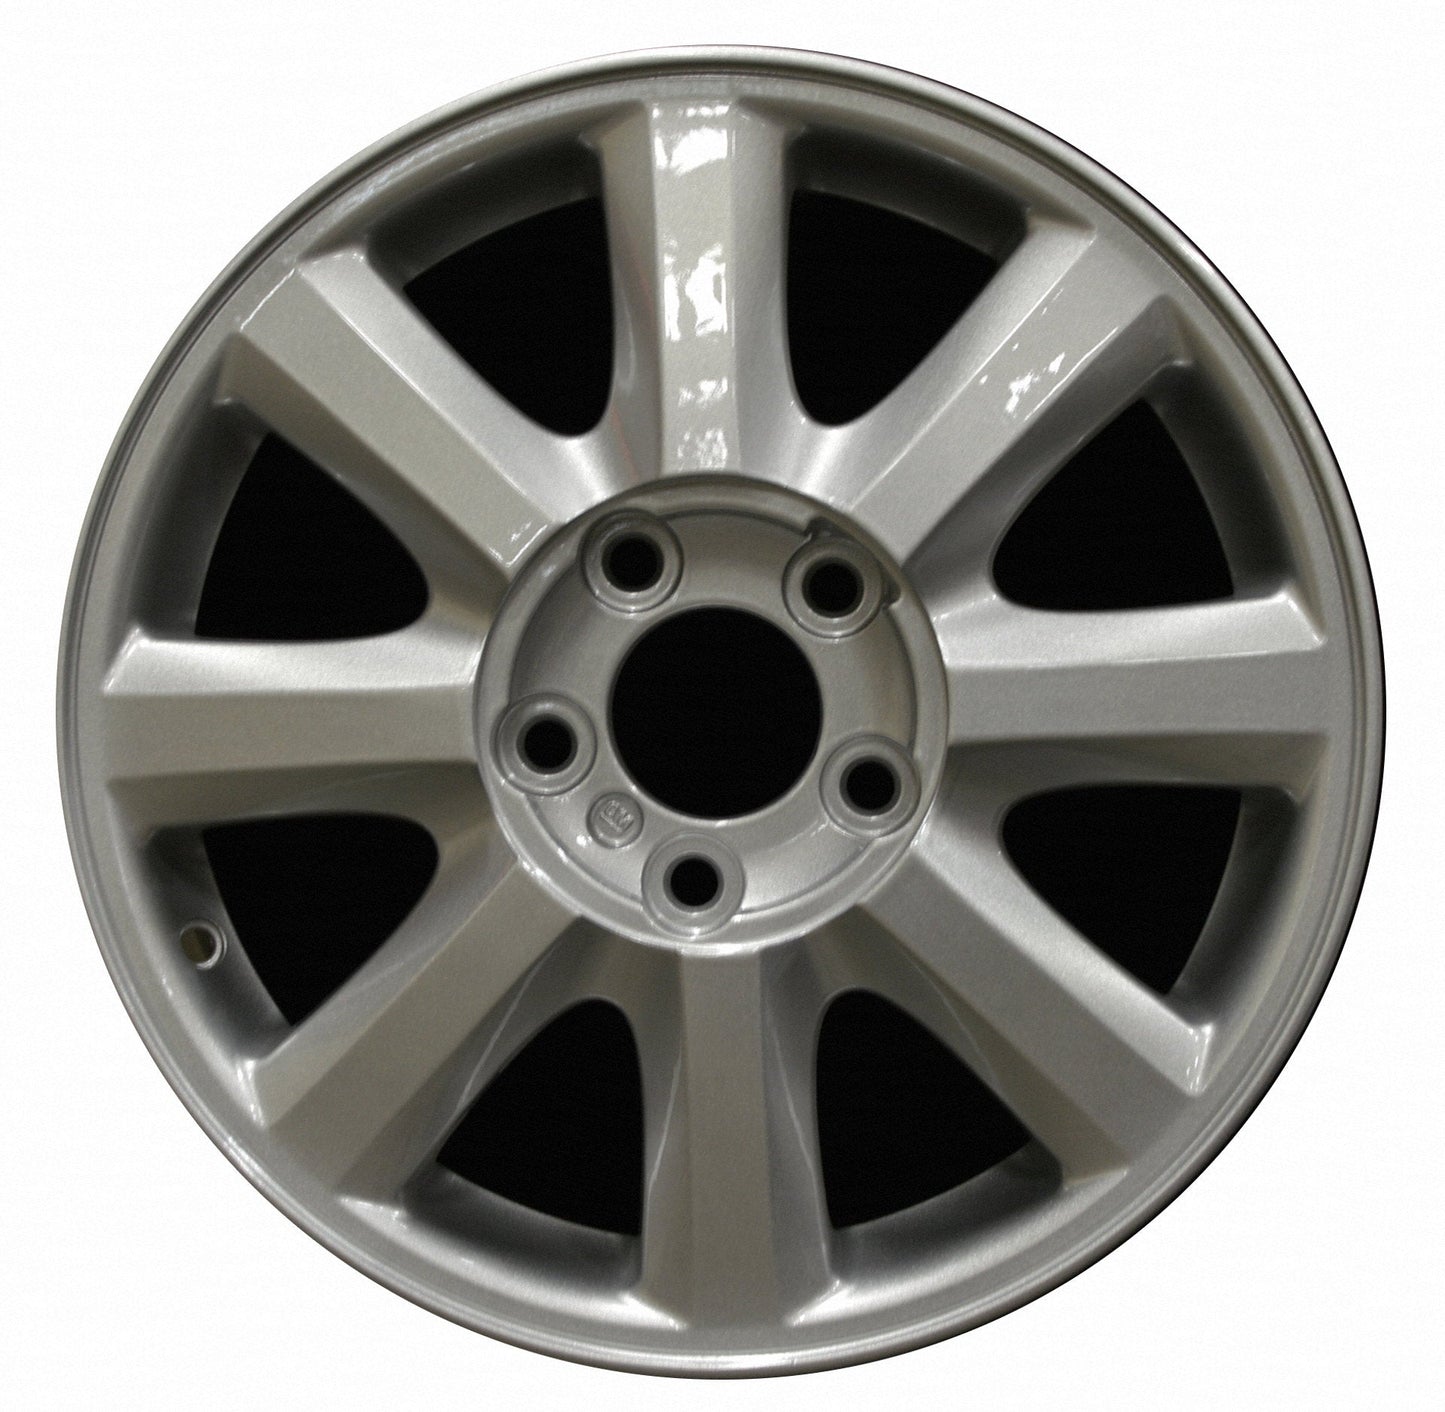 Buick Allure  2005, 2006, 2007, 2008, 2009 Factory OEM Car Wheel Size 16x6.5 Alloy WAO.4056.PS02.FF